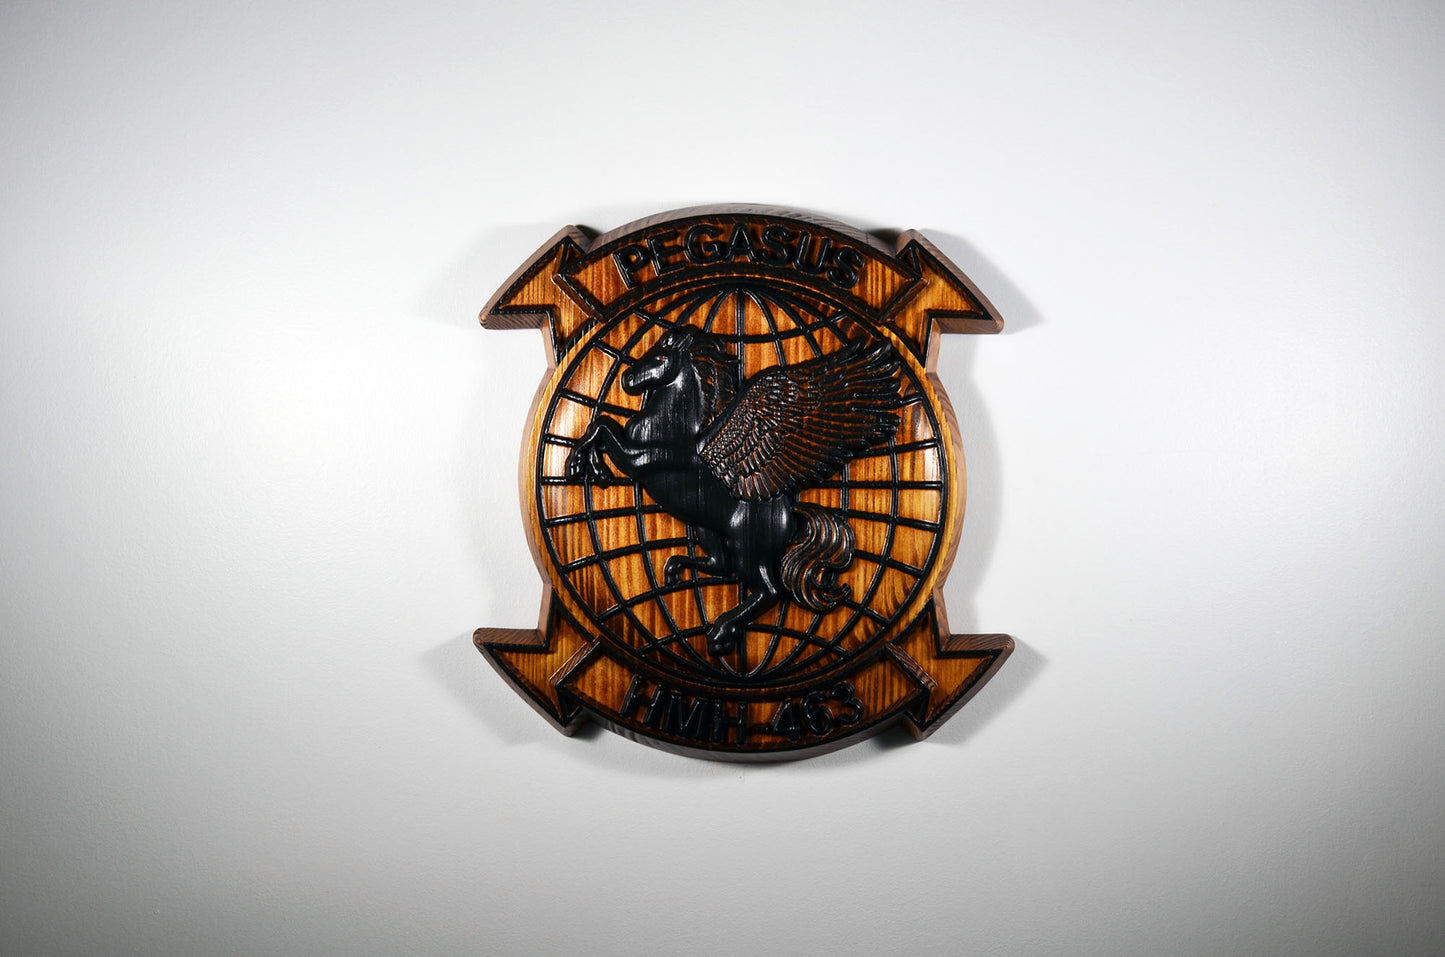 USMC Marine Heavy Helicopter Squadron 463 Blackout, Marine Corps Air Wing, 3d wood carving, military plaque